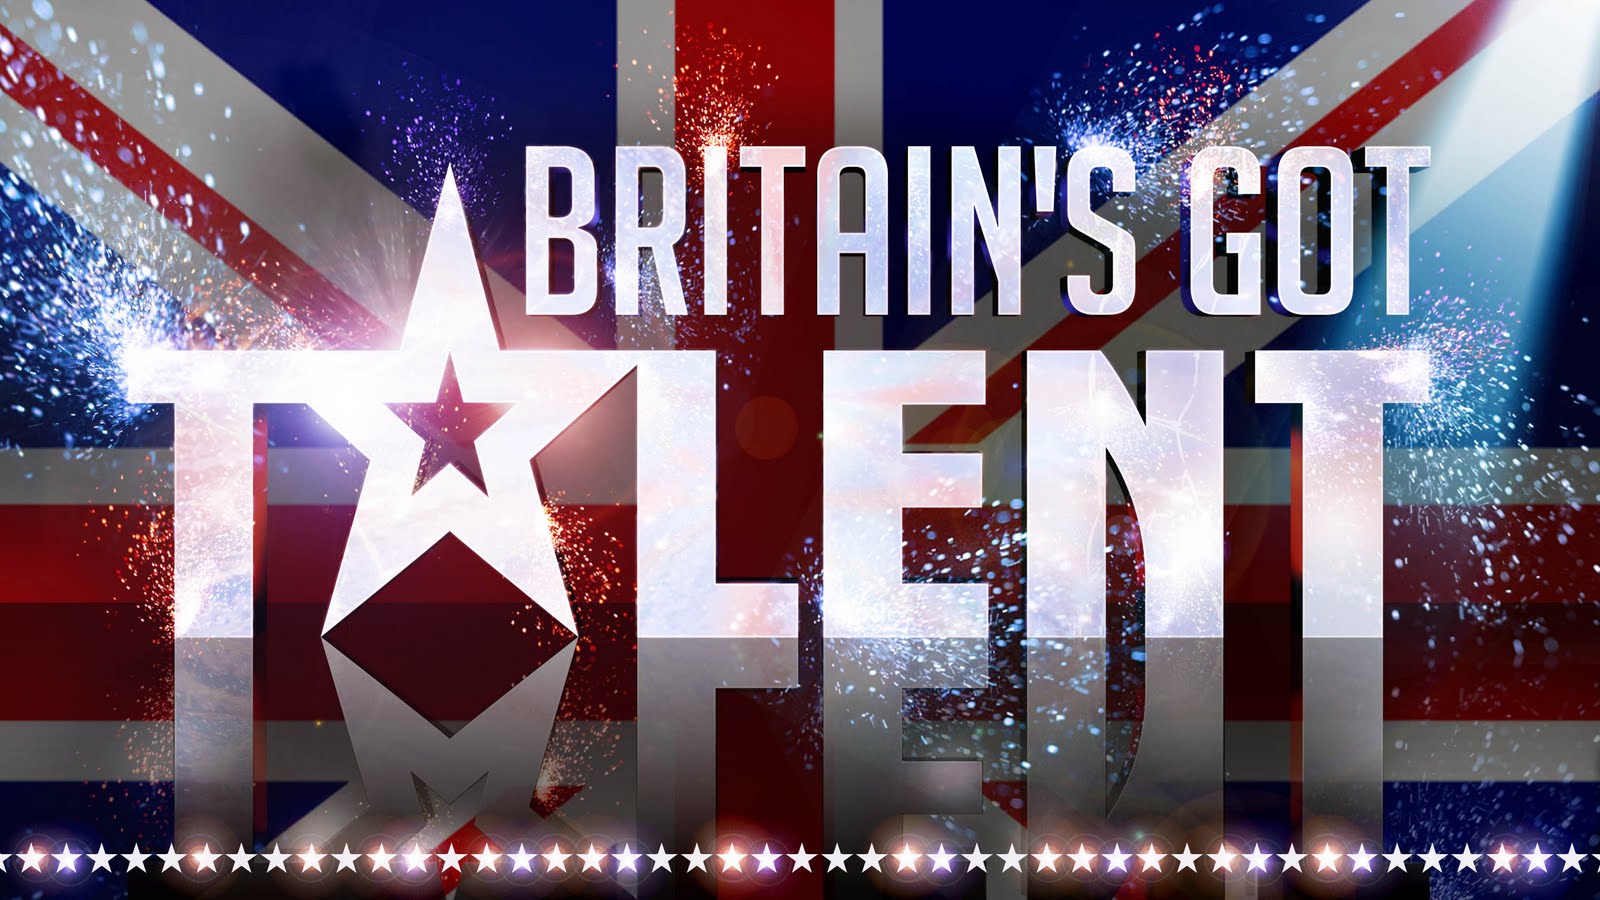 What's Hot - TV: Be on Britain's Got Talent!